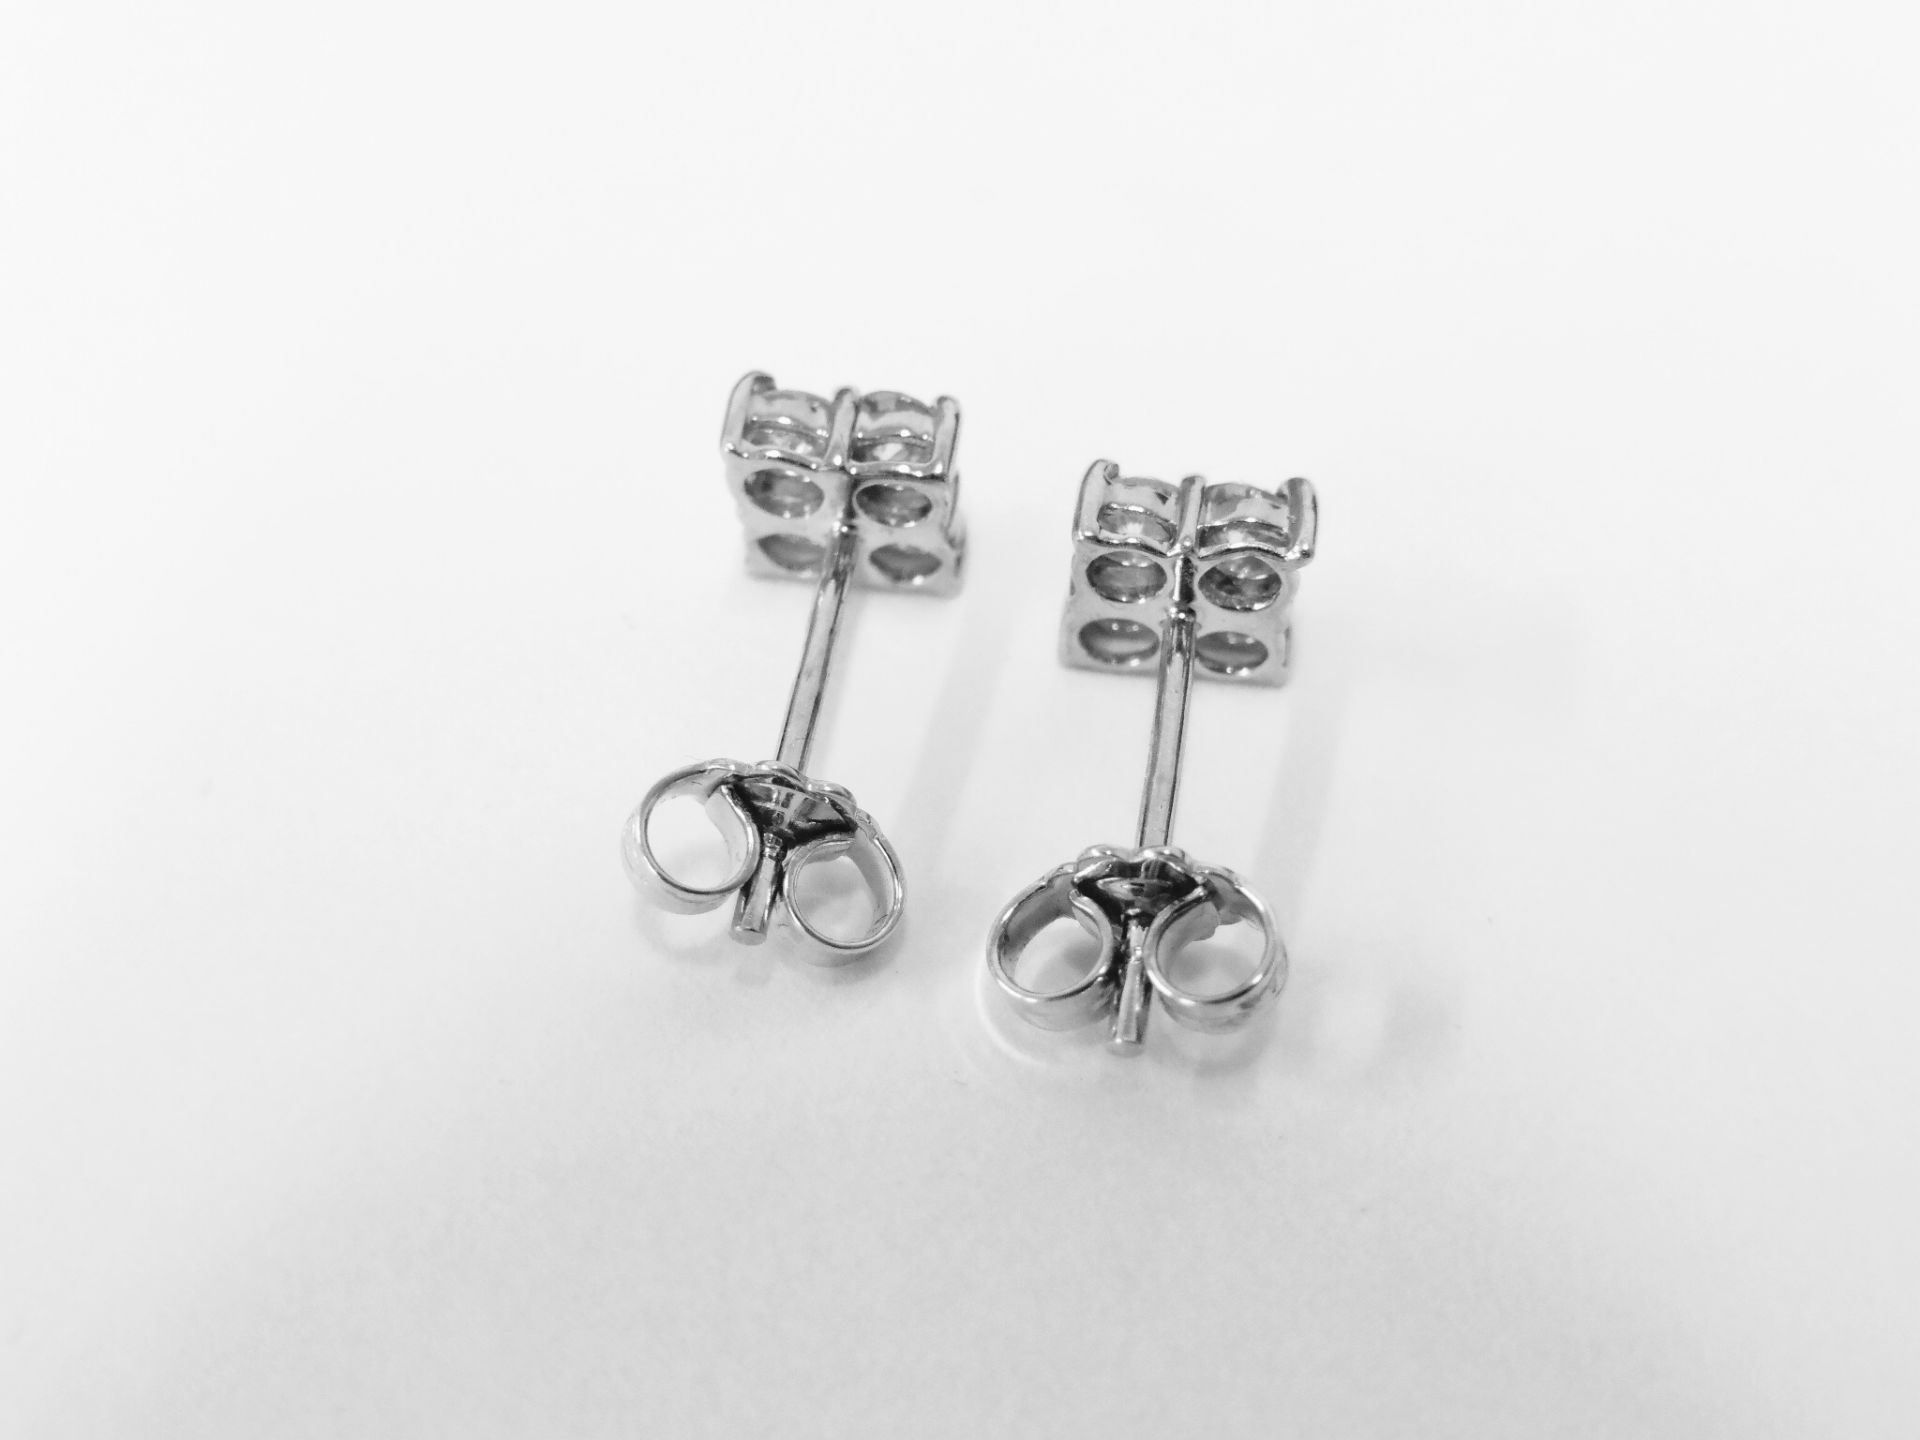 18ct diamond earrings,0.80ct in 8 stone 0.10ct each i si2 clarity and colour 2gms 18ct white gold uk - Image 3 of 3